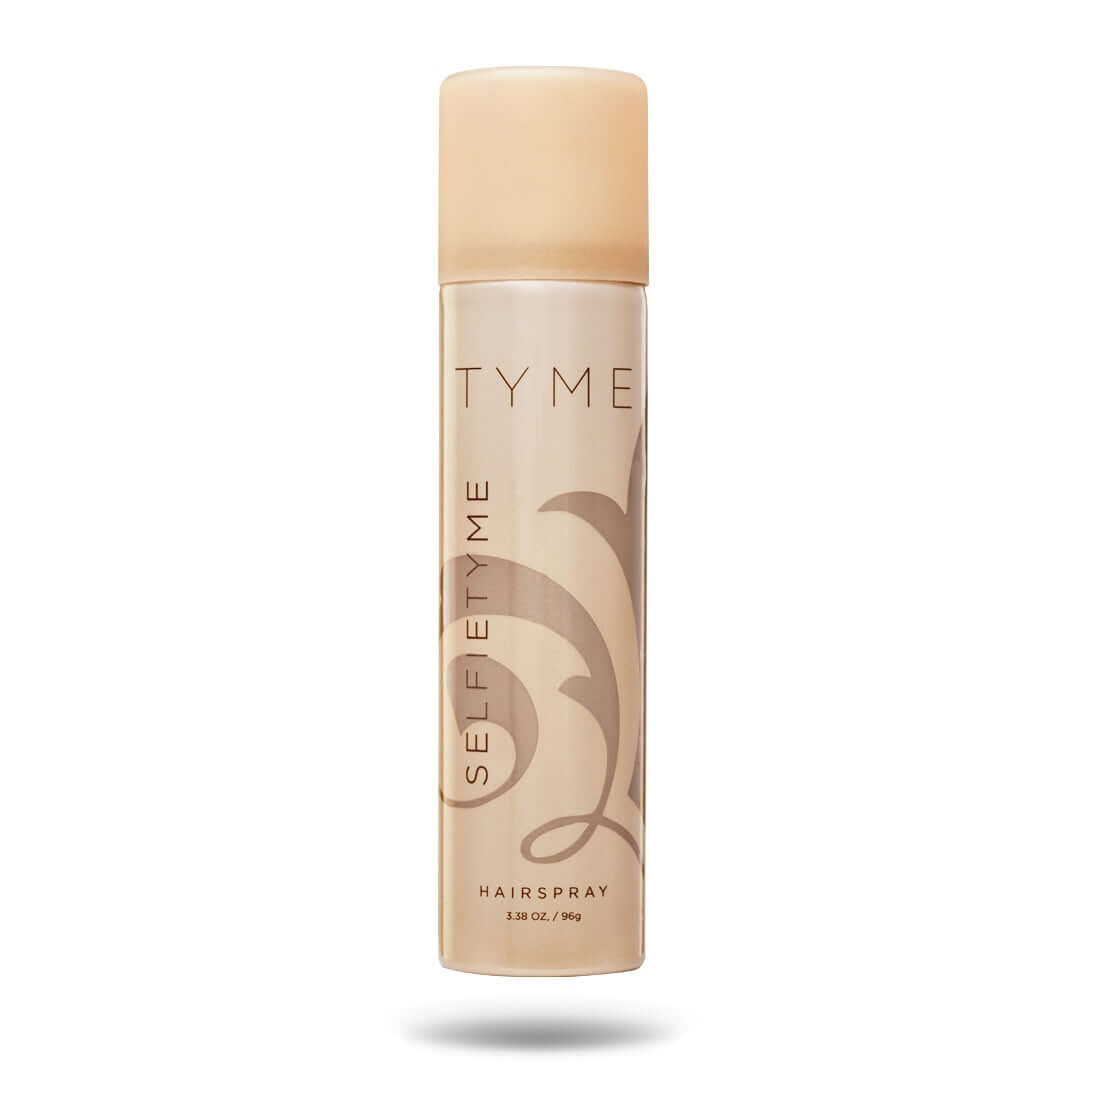 Travel size TYME SELFIETYME Hairspray in gold aerosol canister with dark gold logo and fleur de lis.